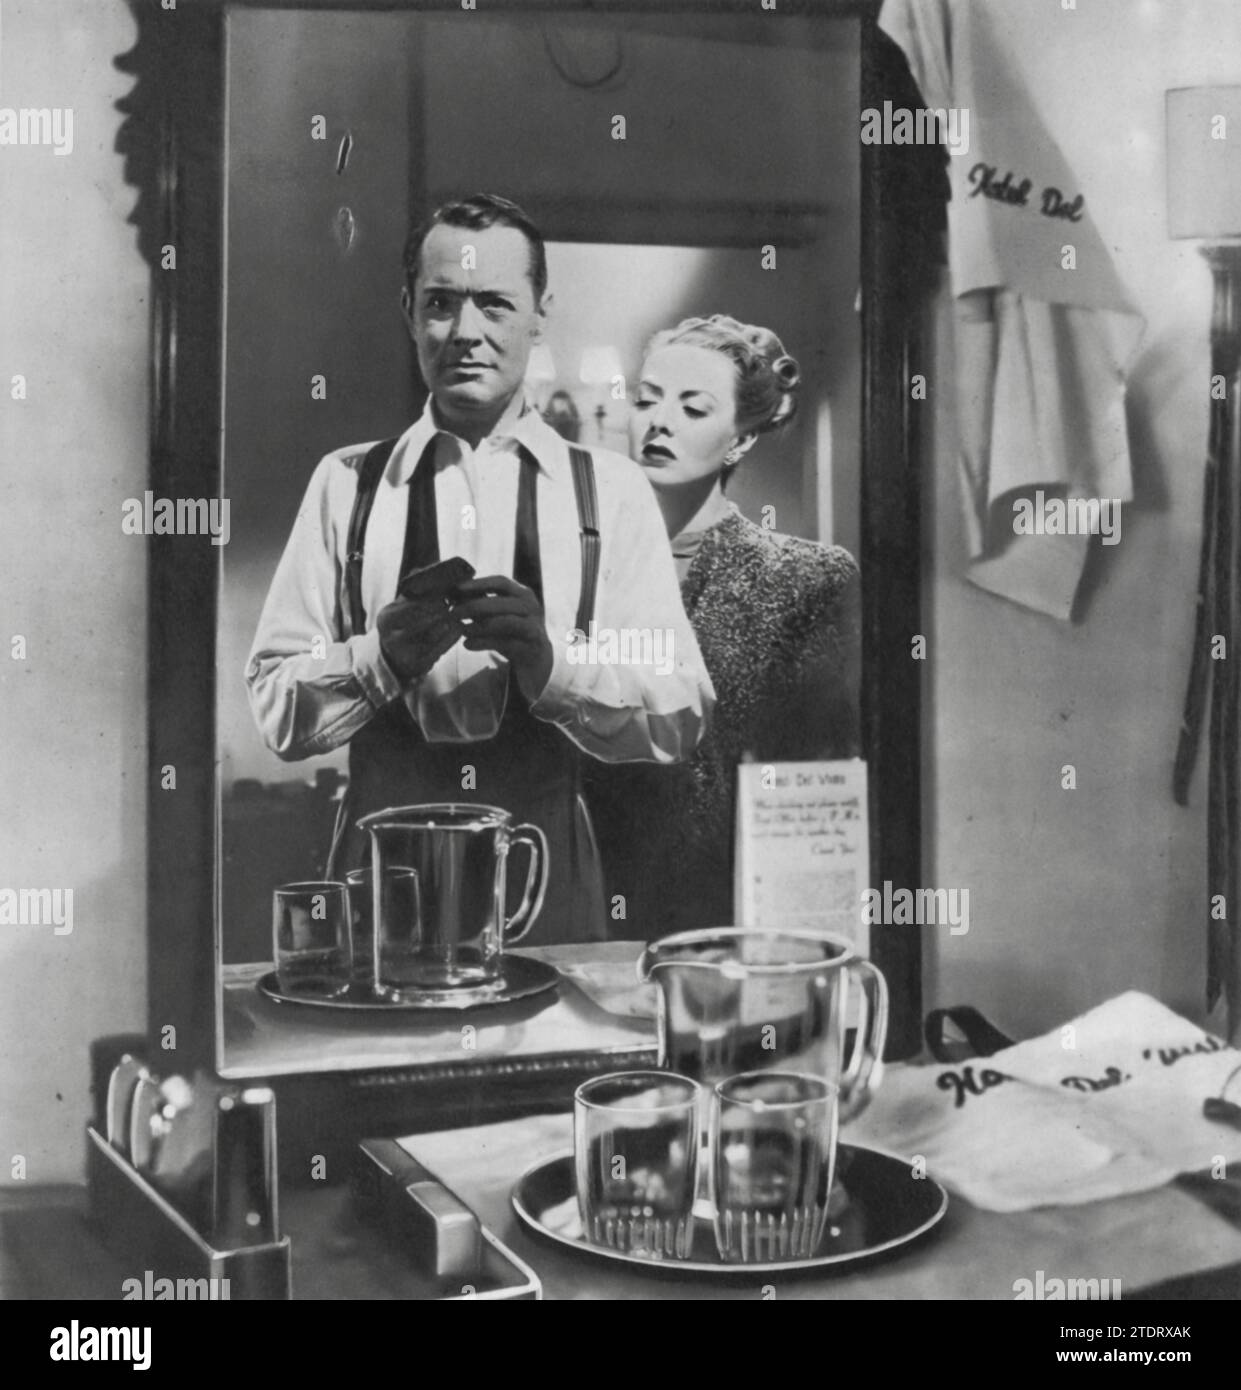 Robert Montgomery and Audrey Totter are featured in the film 'Lady in the Lake' (1947). This noir thriller is distinctive for its use of first-person camera perspective, immersing viewers directly into the unfolding mystery. Montgomery not only takes the lead role but also steps behind the camera as the director, adding a unique touch to the film's storytelling. Stock Photo